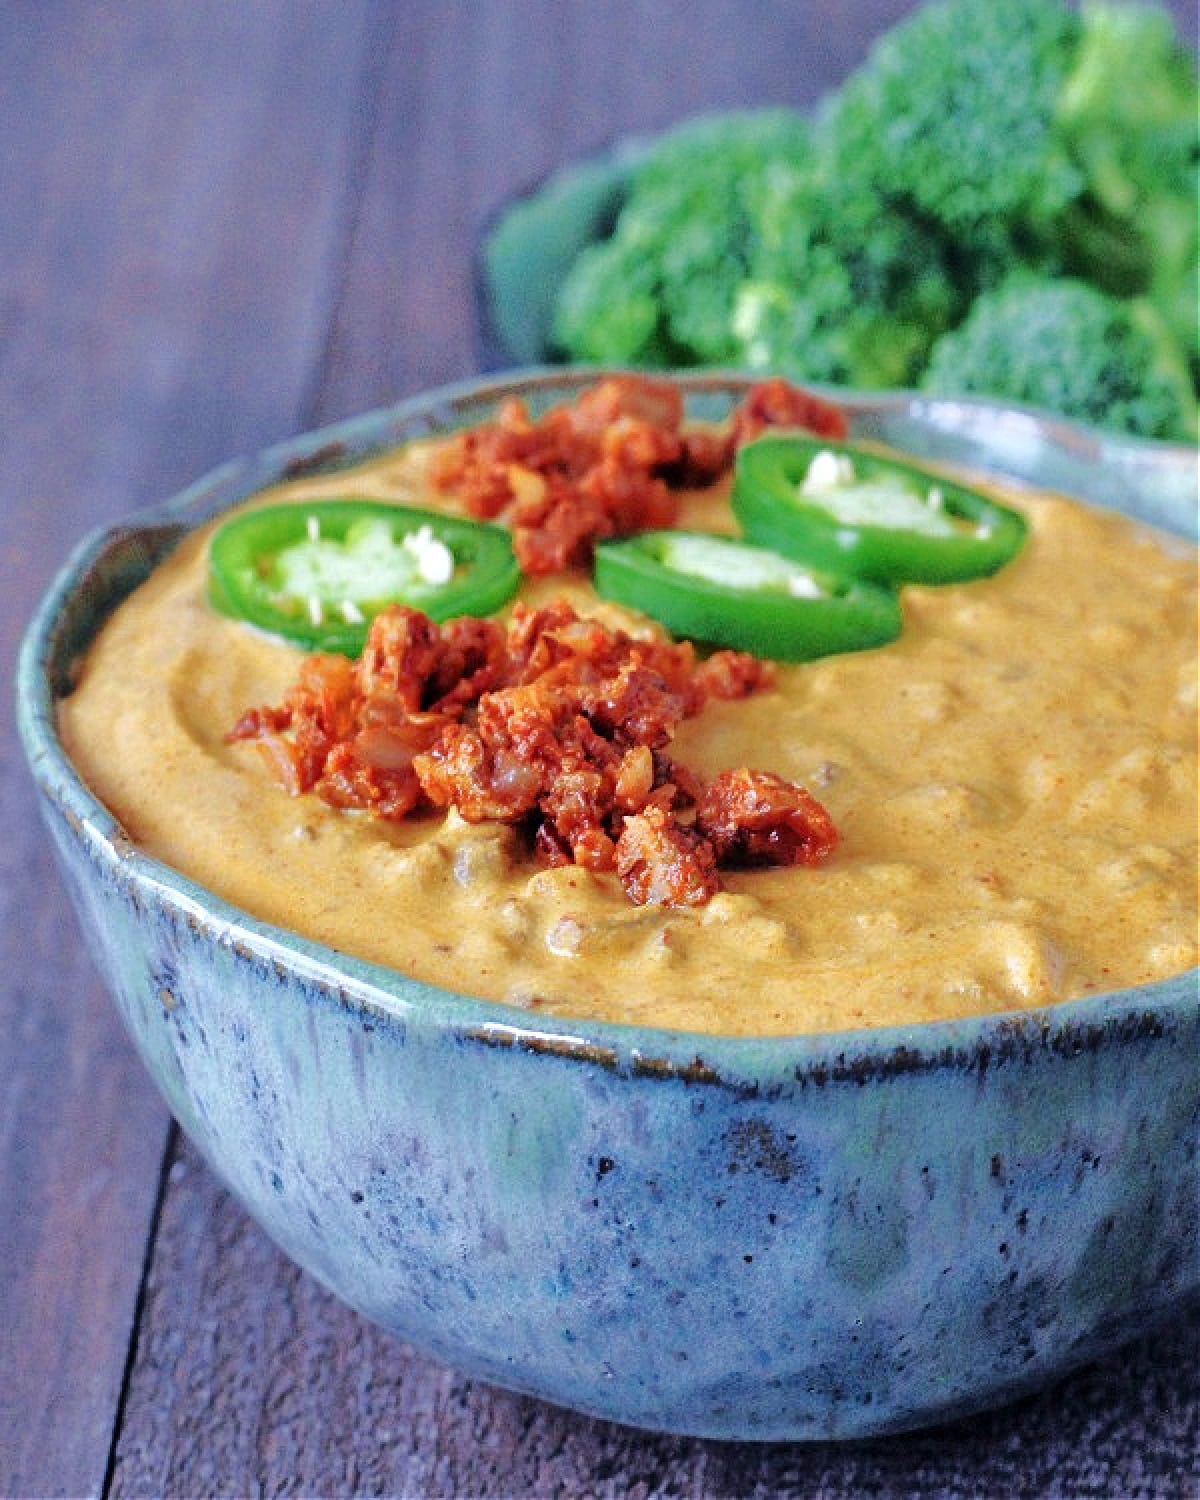 Spicy Vegan Queso in a bowl, garnished with fresh sliced jalapeno. Broccoli trees for dipping in background.